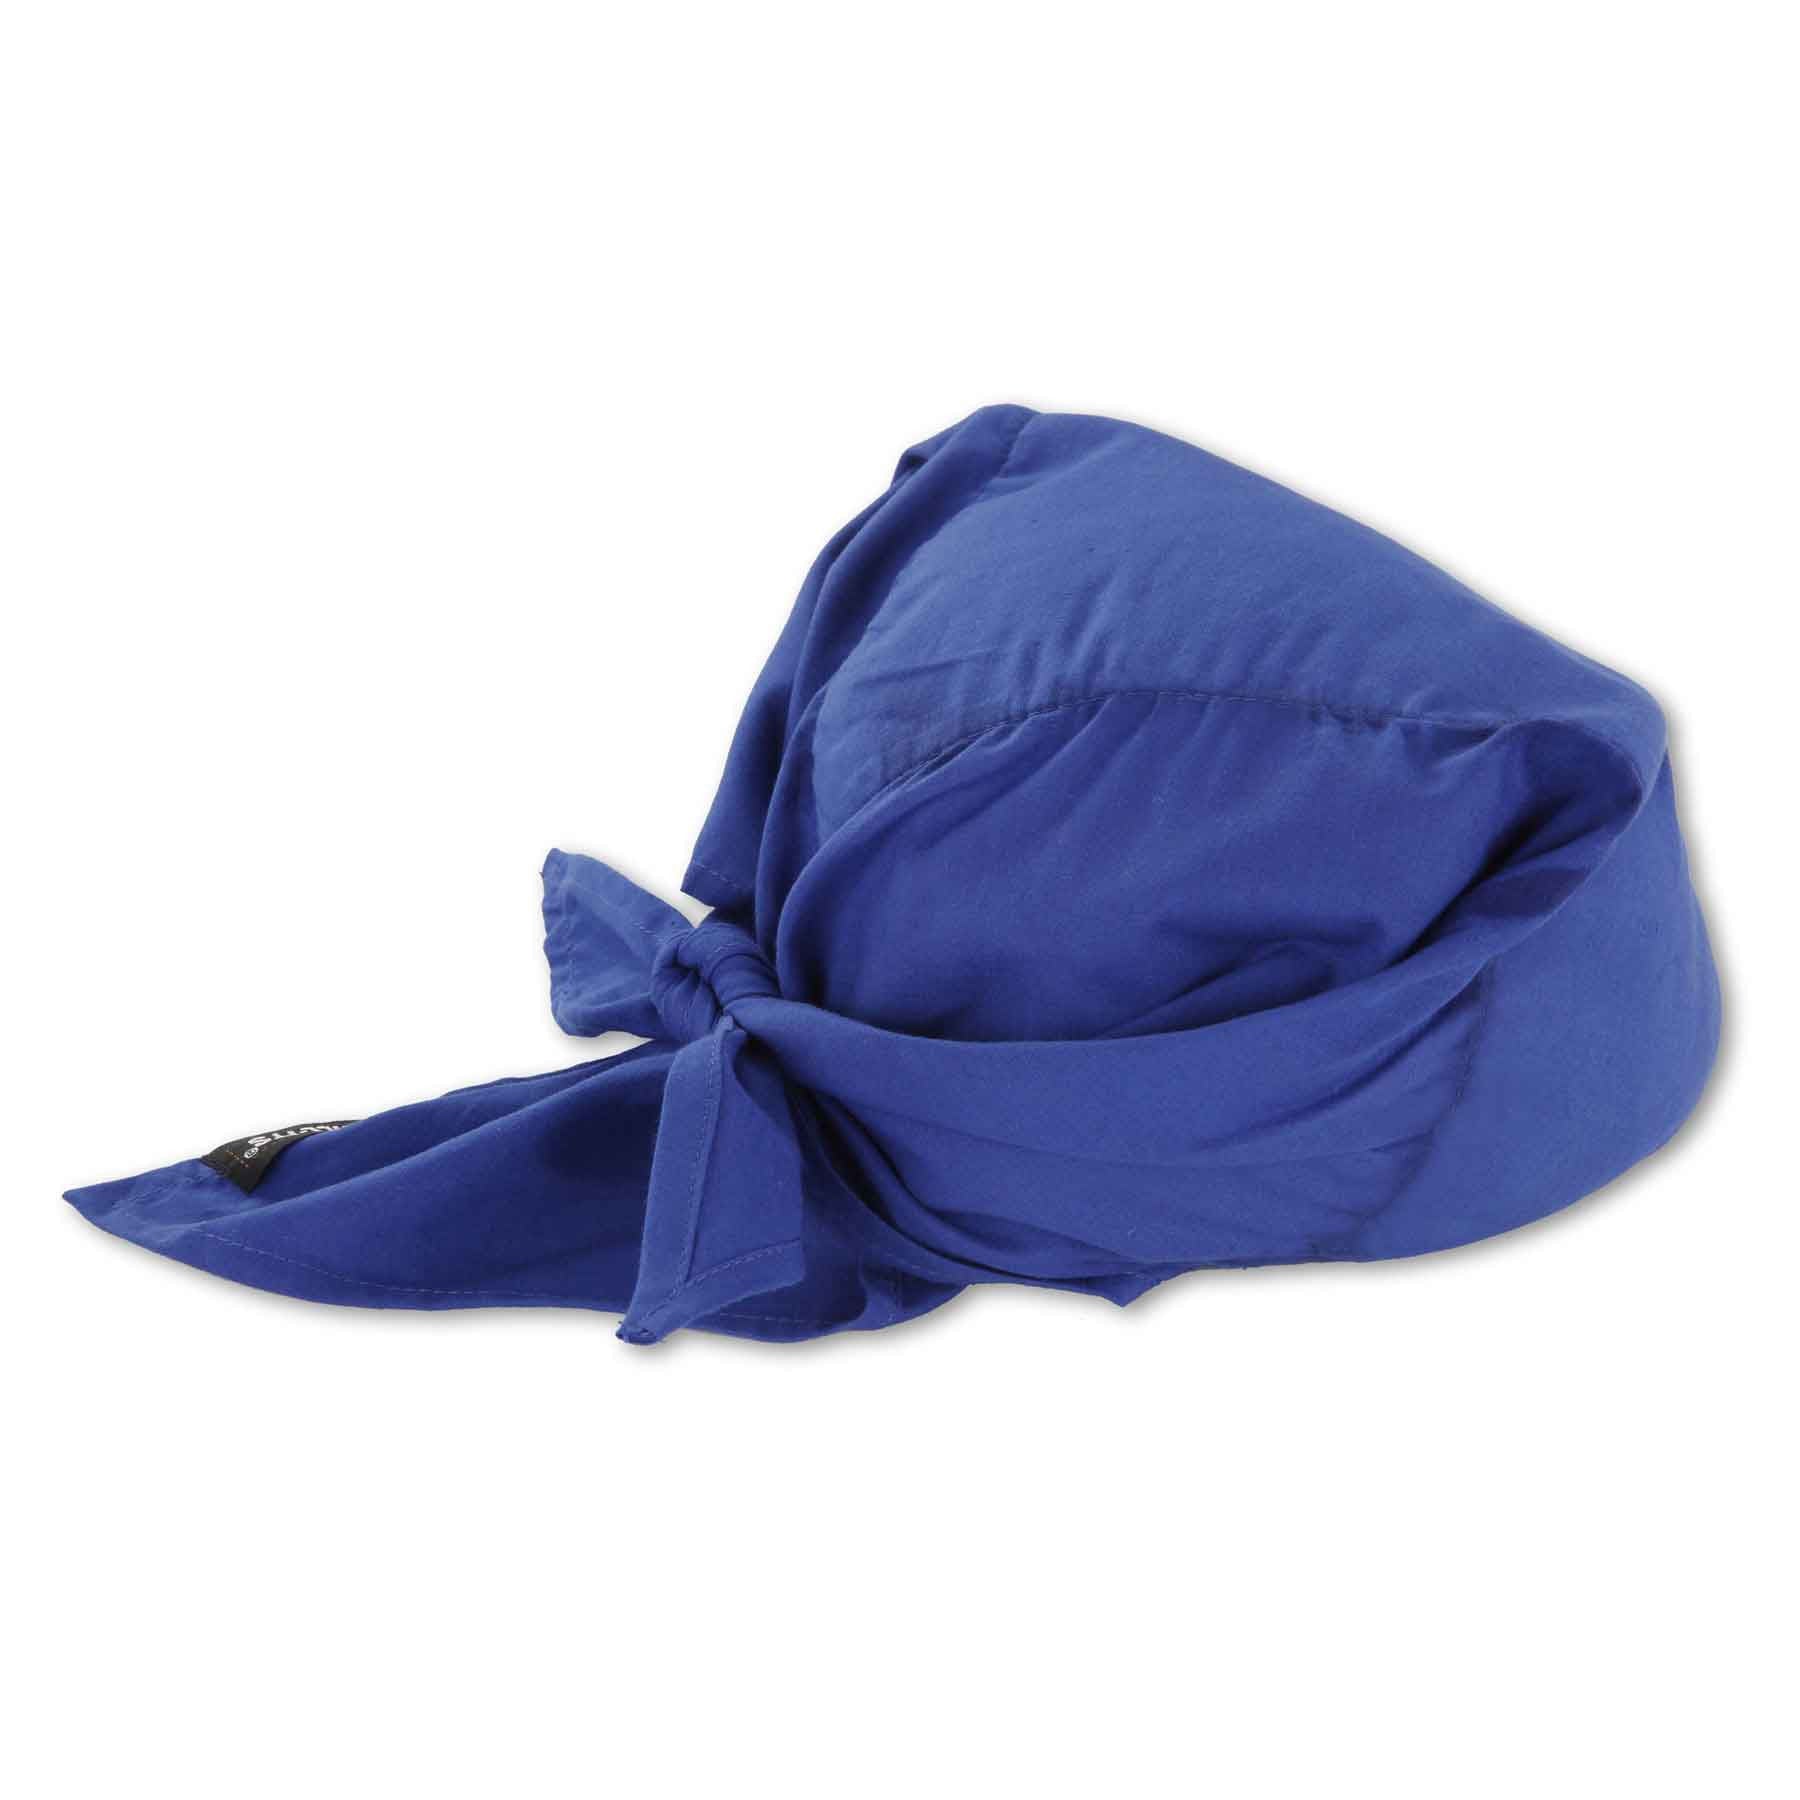 Ergodyne-Chill-Its 6710 Evaporative Cooling Triangle Hat-eSafety Supplies, Inc